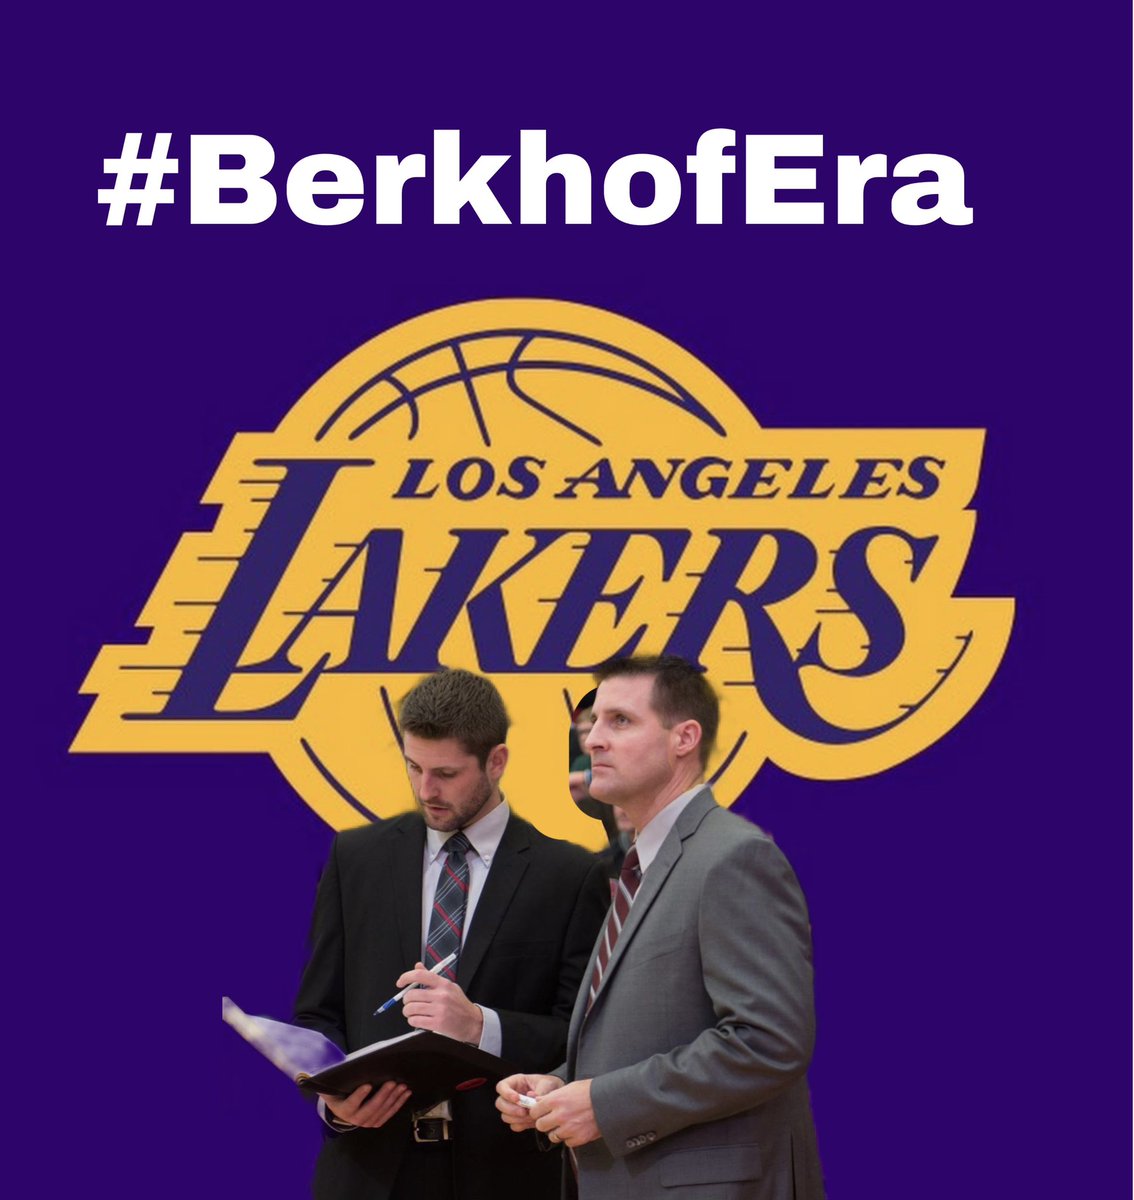 BREAKING: I can confirm that the Jeff Berkhof Era might be coming to an end. Reports tell me Jeff Berkhof and Lance Westberg will be flying out to Los Angeles California tomorrow afternoon to interview for the Head Coaching job. #d3hoops #NBA #Lakers #WIAC #Norrisknowsball